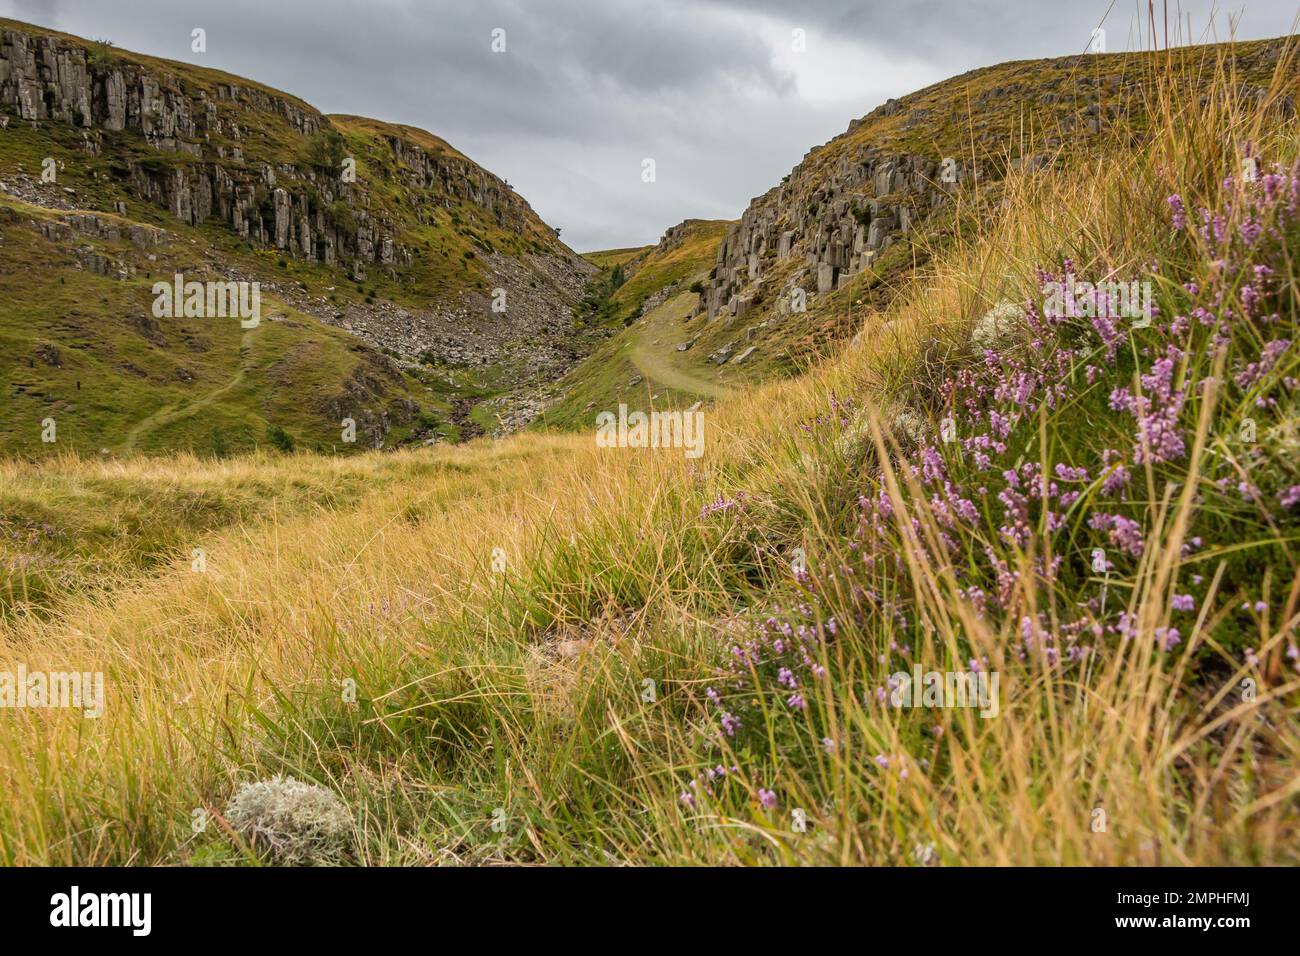 A clump of purple flowering heather on the hillside by the dramatic Dolerite cliffs of Holwick Scar. Stock Photo